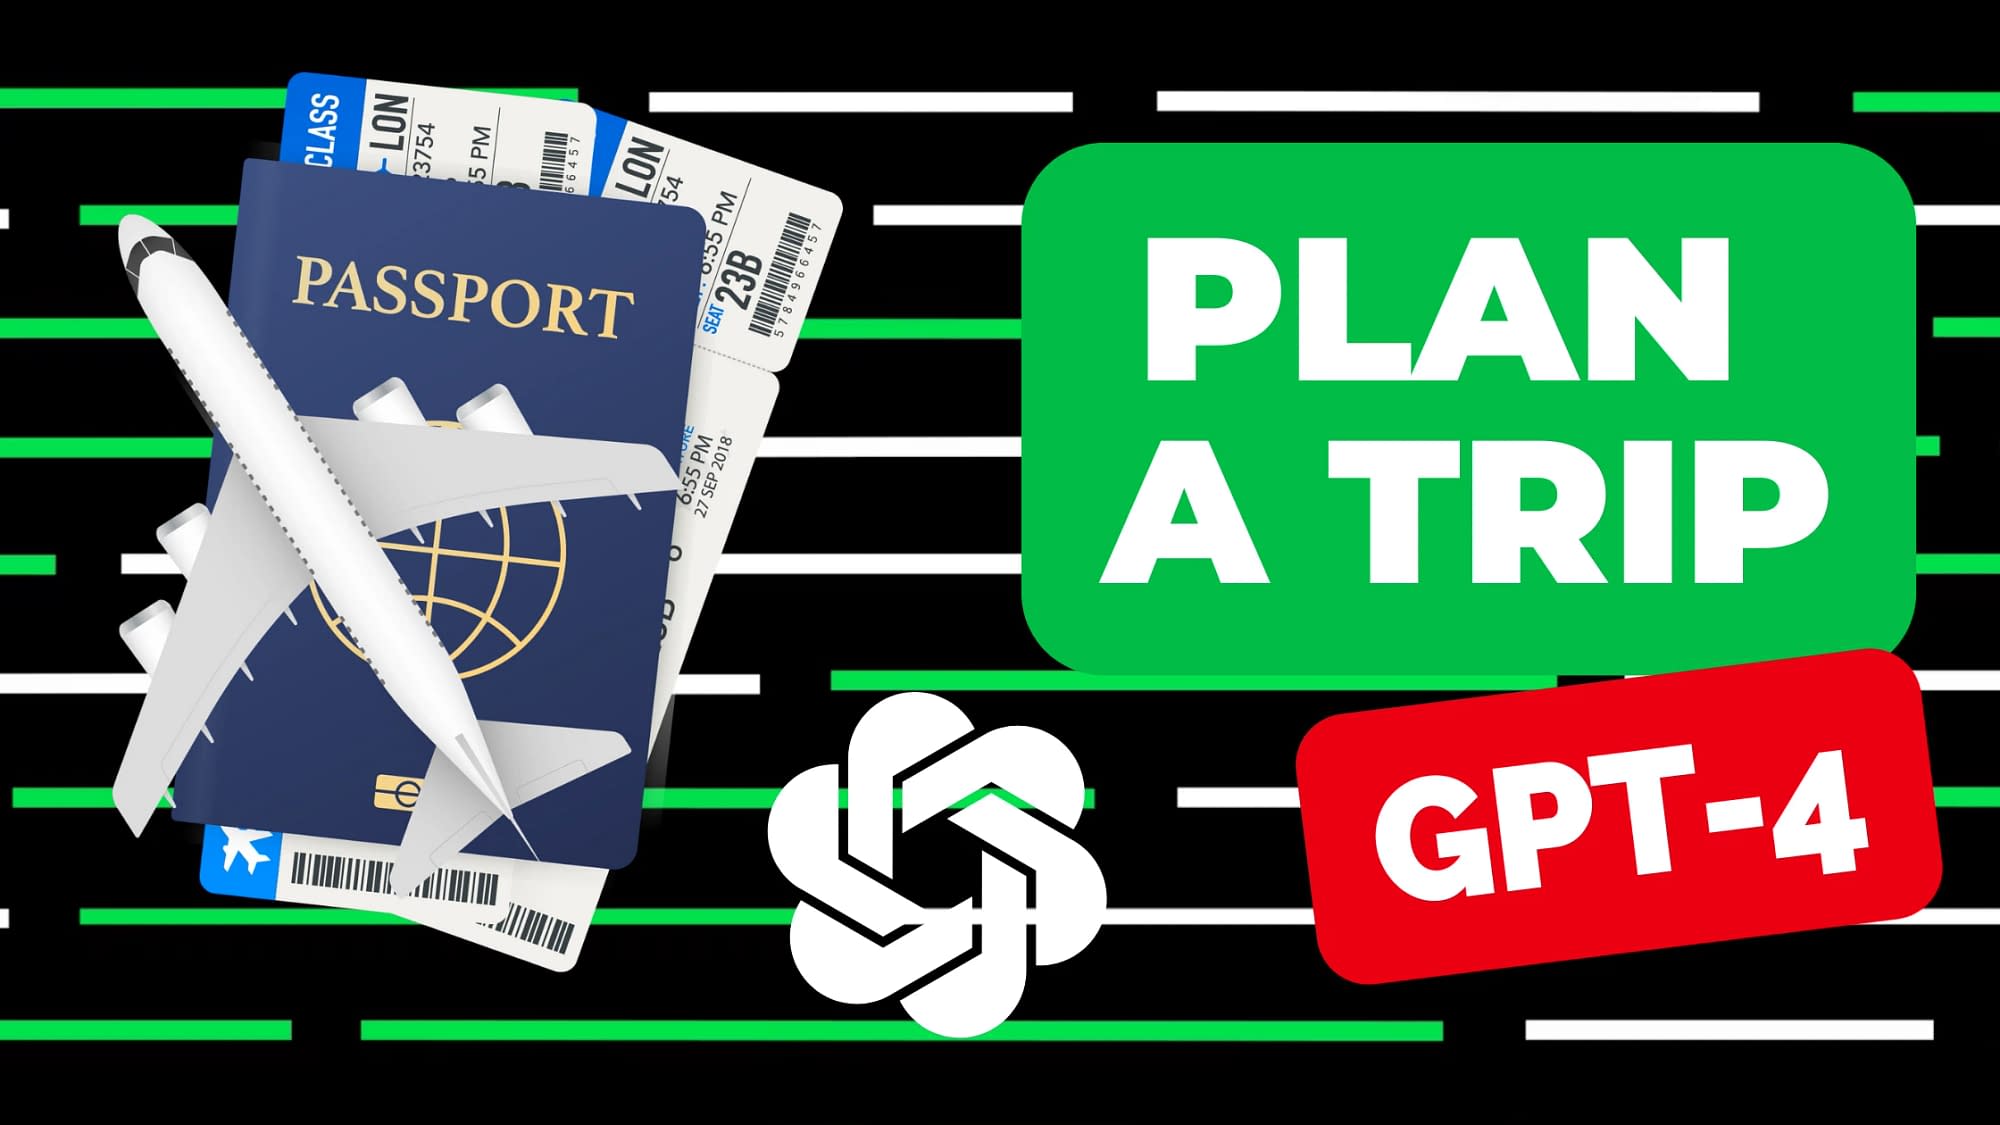 How to plan a trip with GPT-4